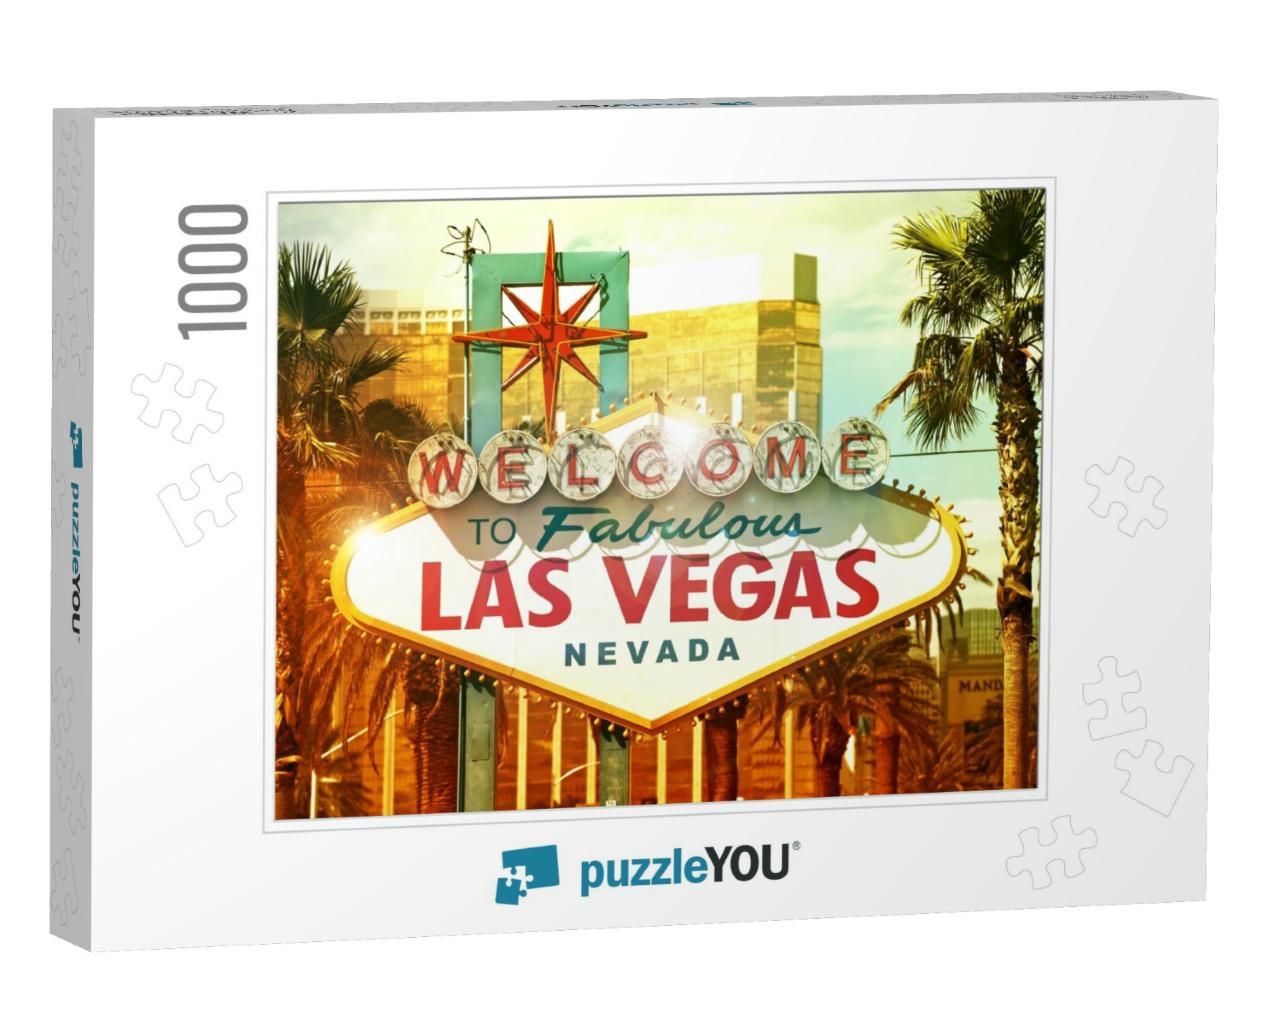 Fabulous Vegas - Welcome to Fabulous Las Vegas, Nevada -... Jigsaw Puzzle with 1000 pieces